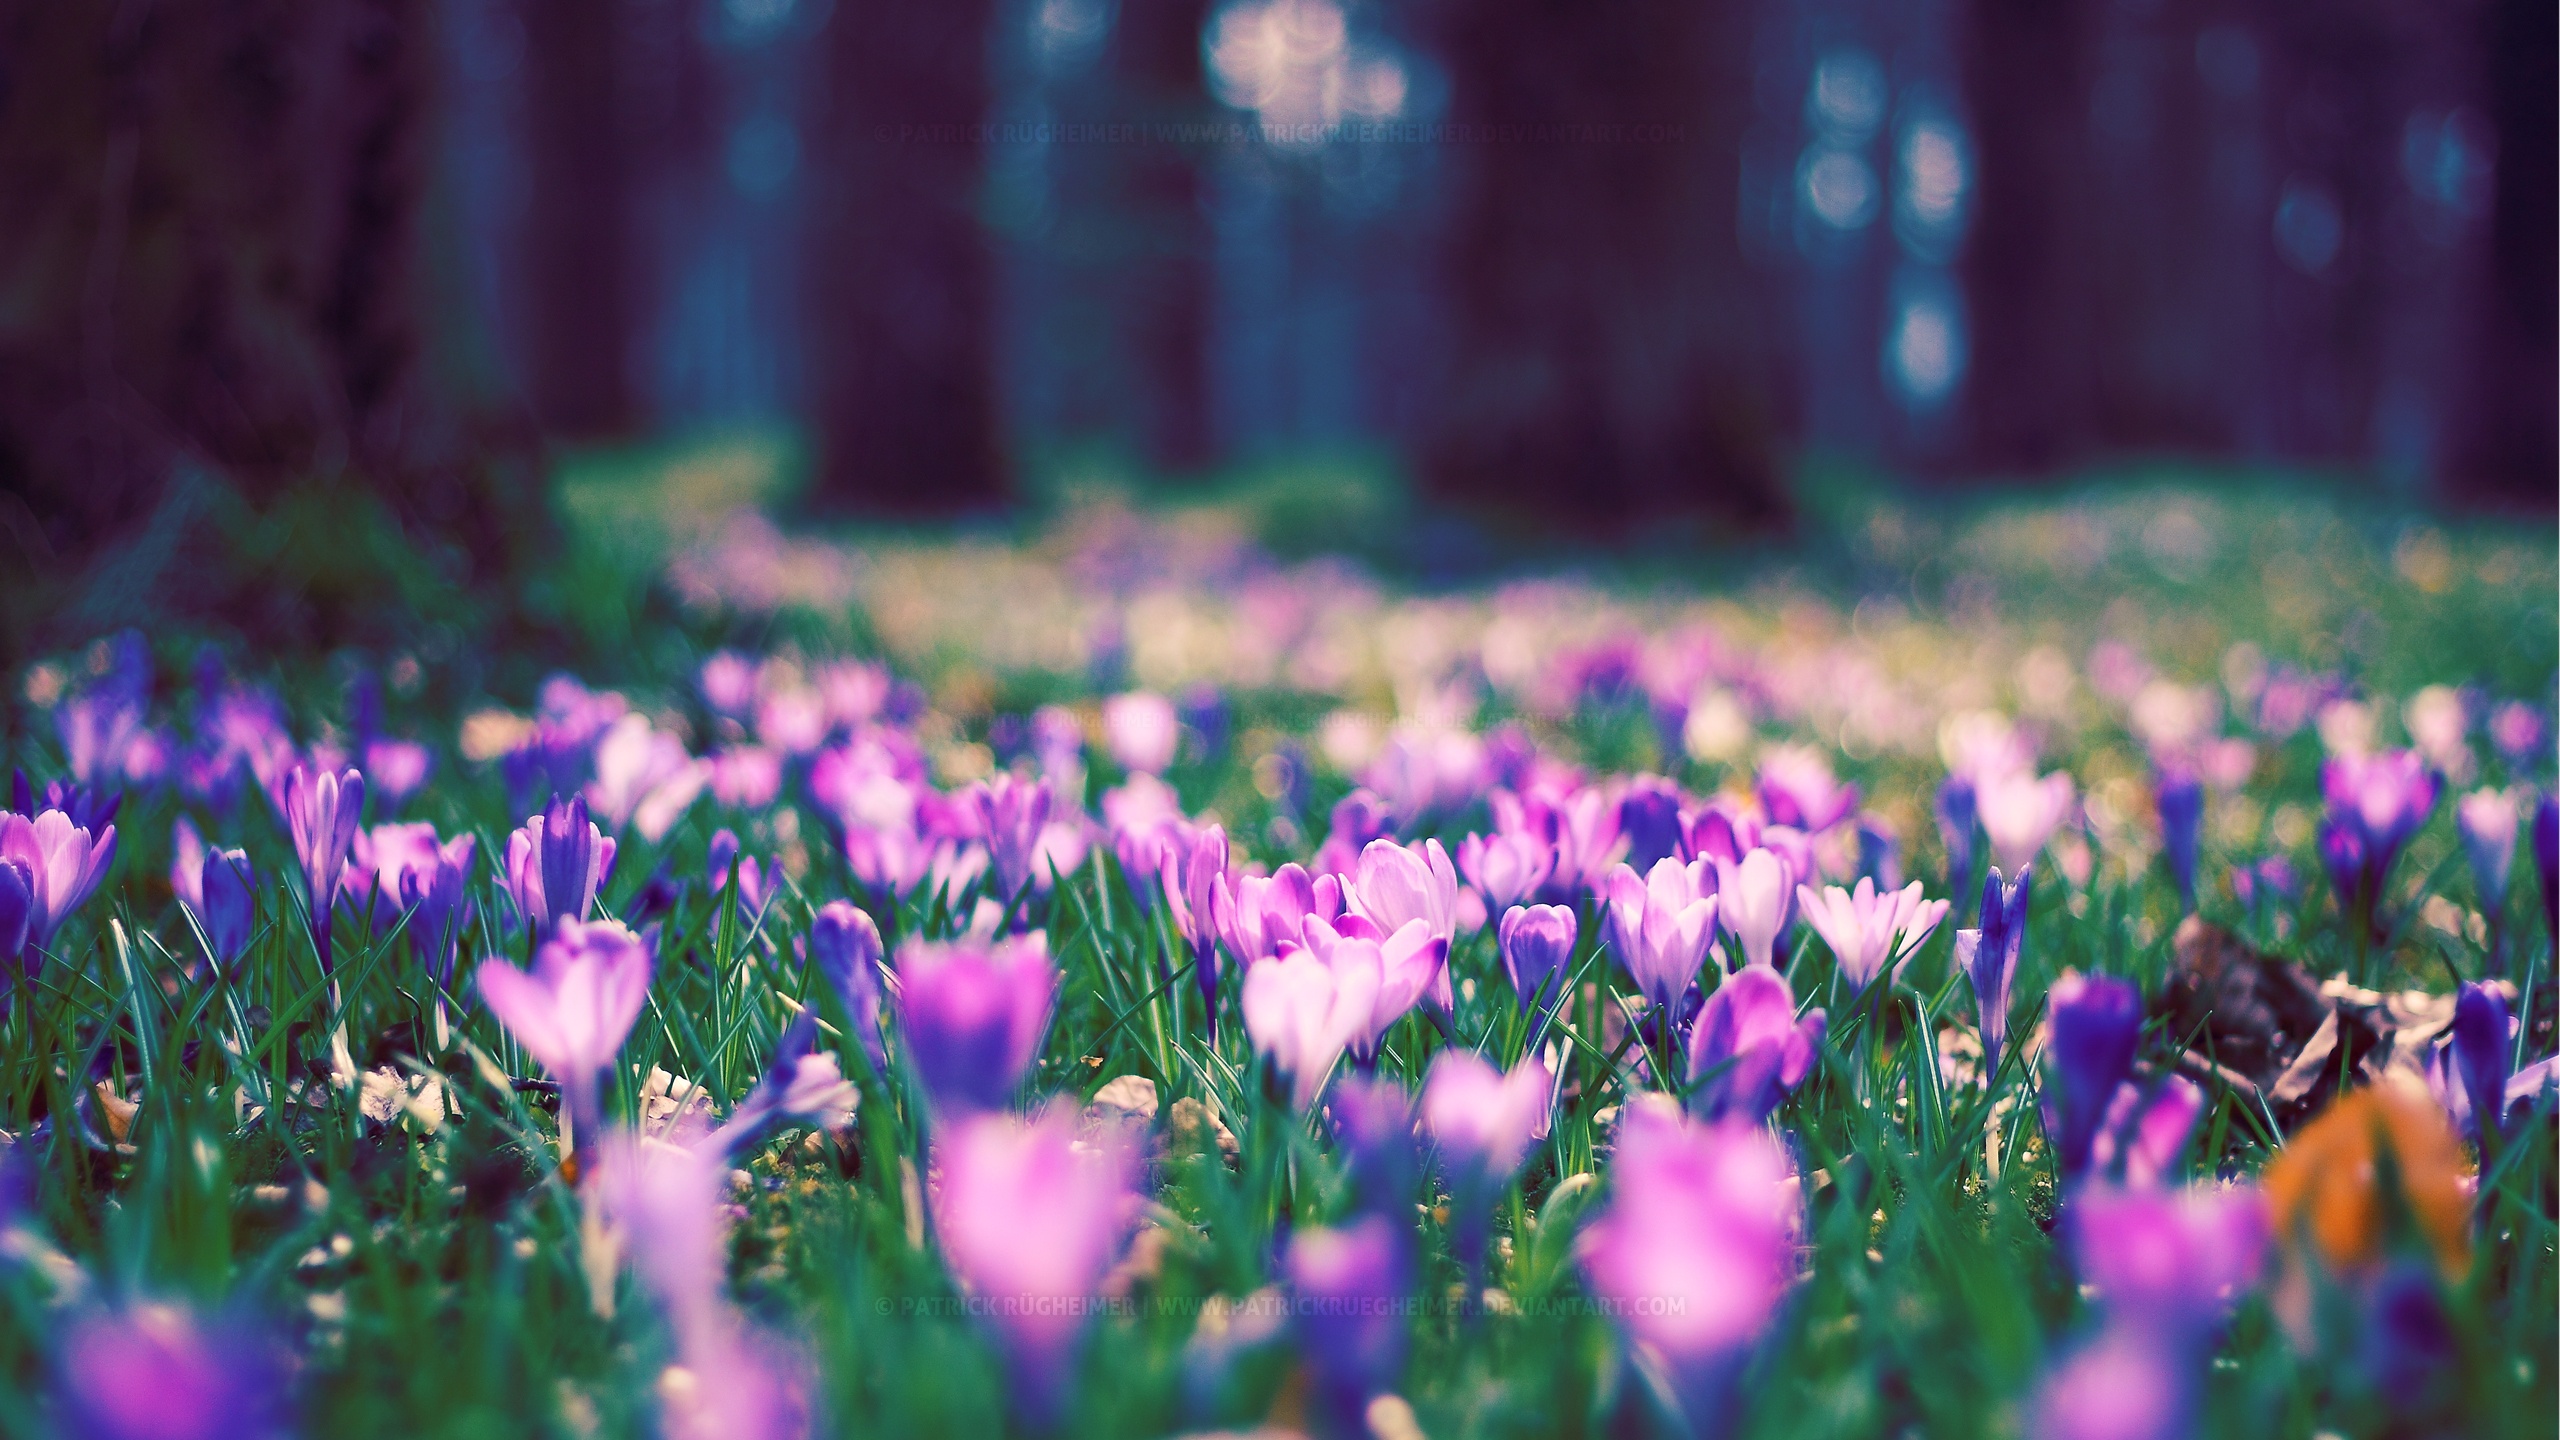 Spring flowers wallpaper nature wallpapers for free download about ...